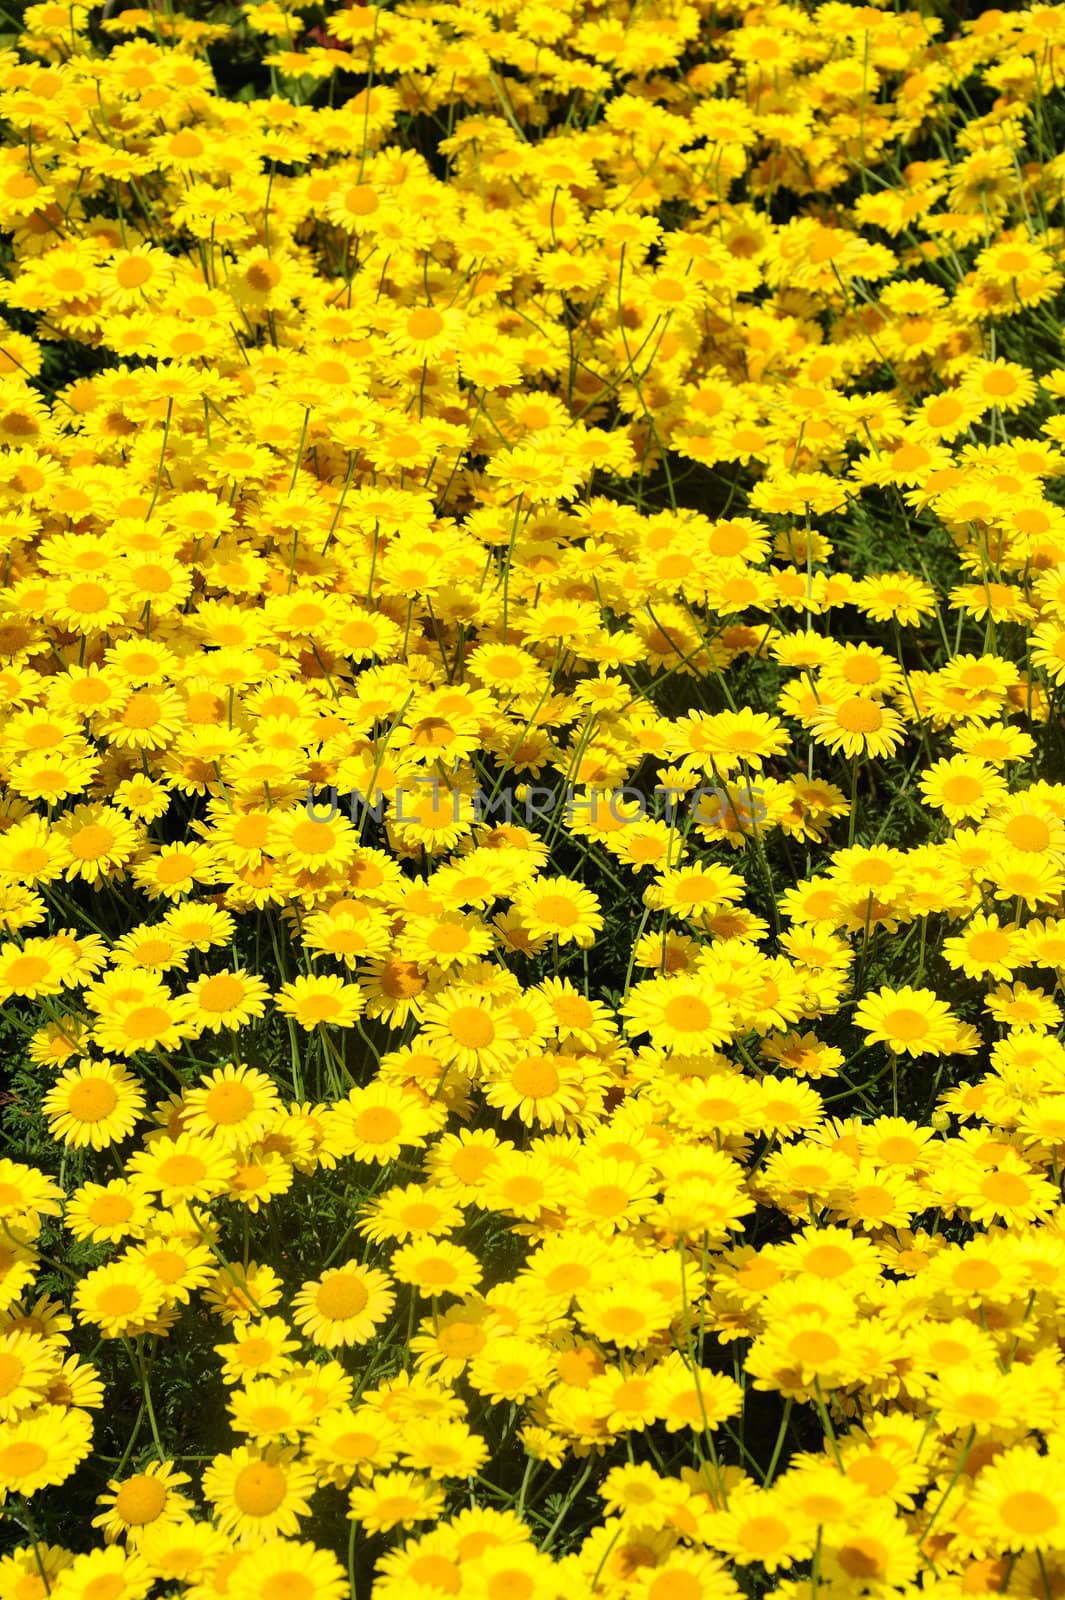 Close up of a bed of Anthemis tinctoria flowers (Golden Rays, Golden marguerite, Oxeye chamomile)